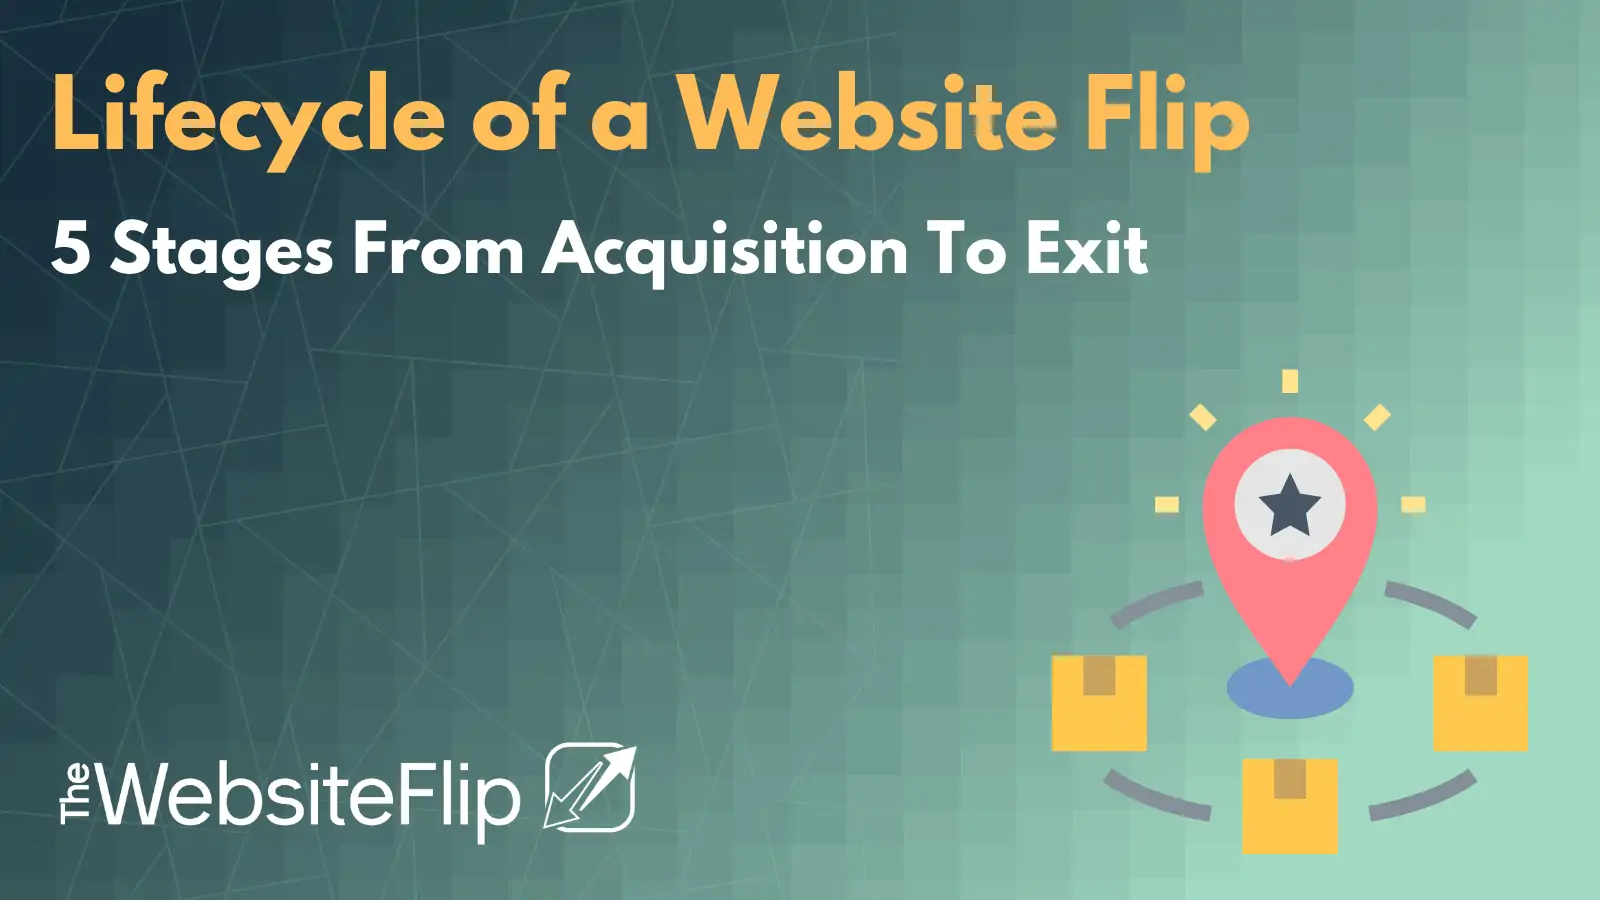 Lifecycle of a website flip